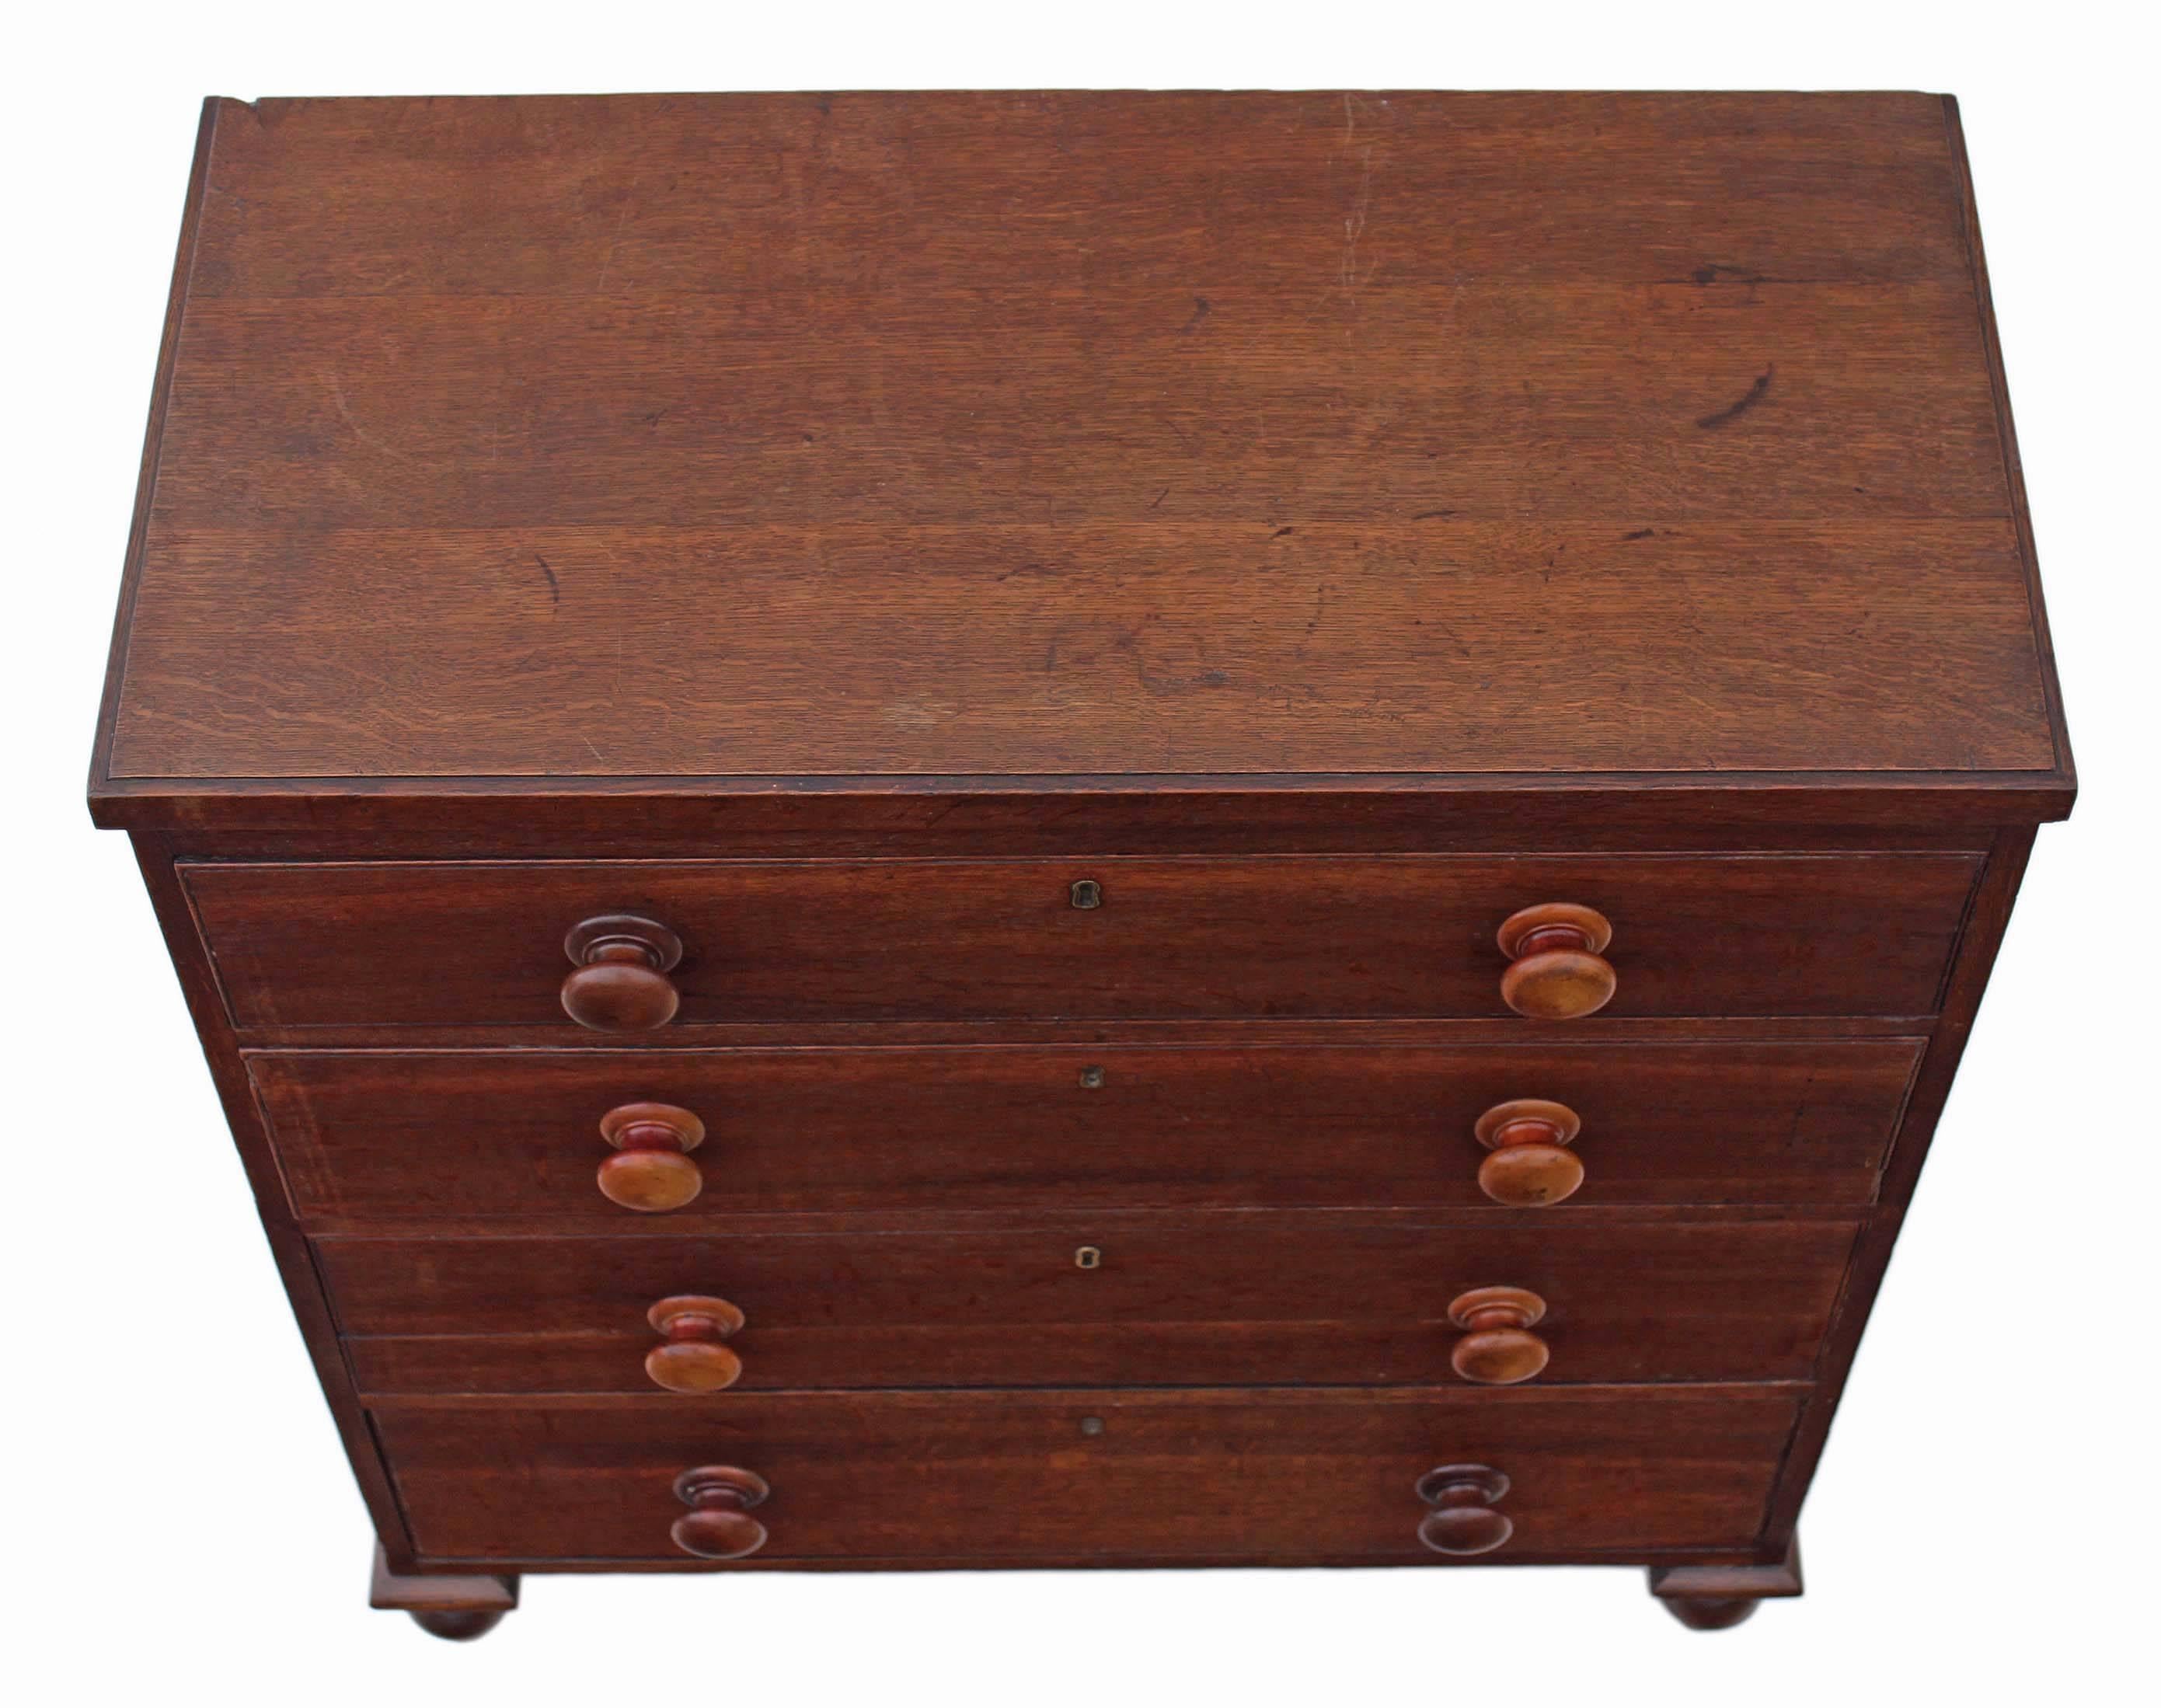 British Antique Early Victorian 19th Century Oak Chest of Drawers For Sale